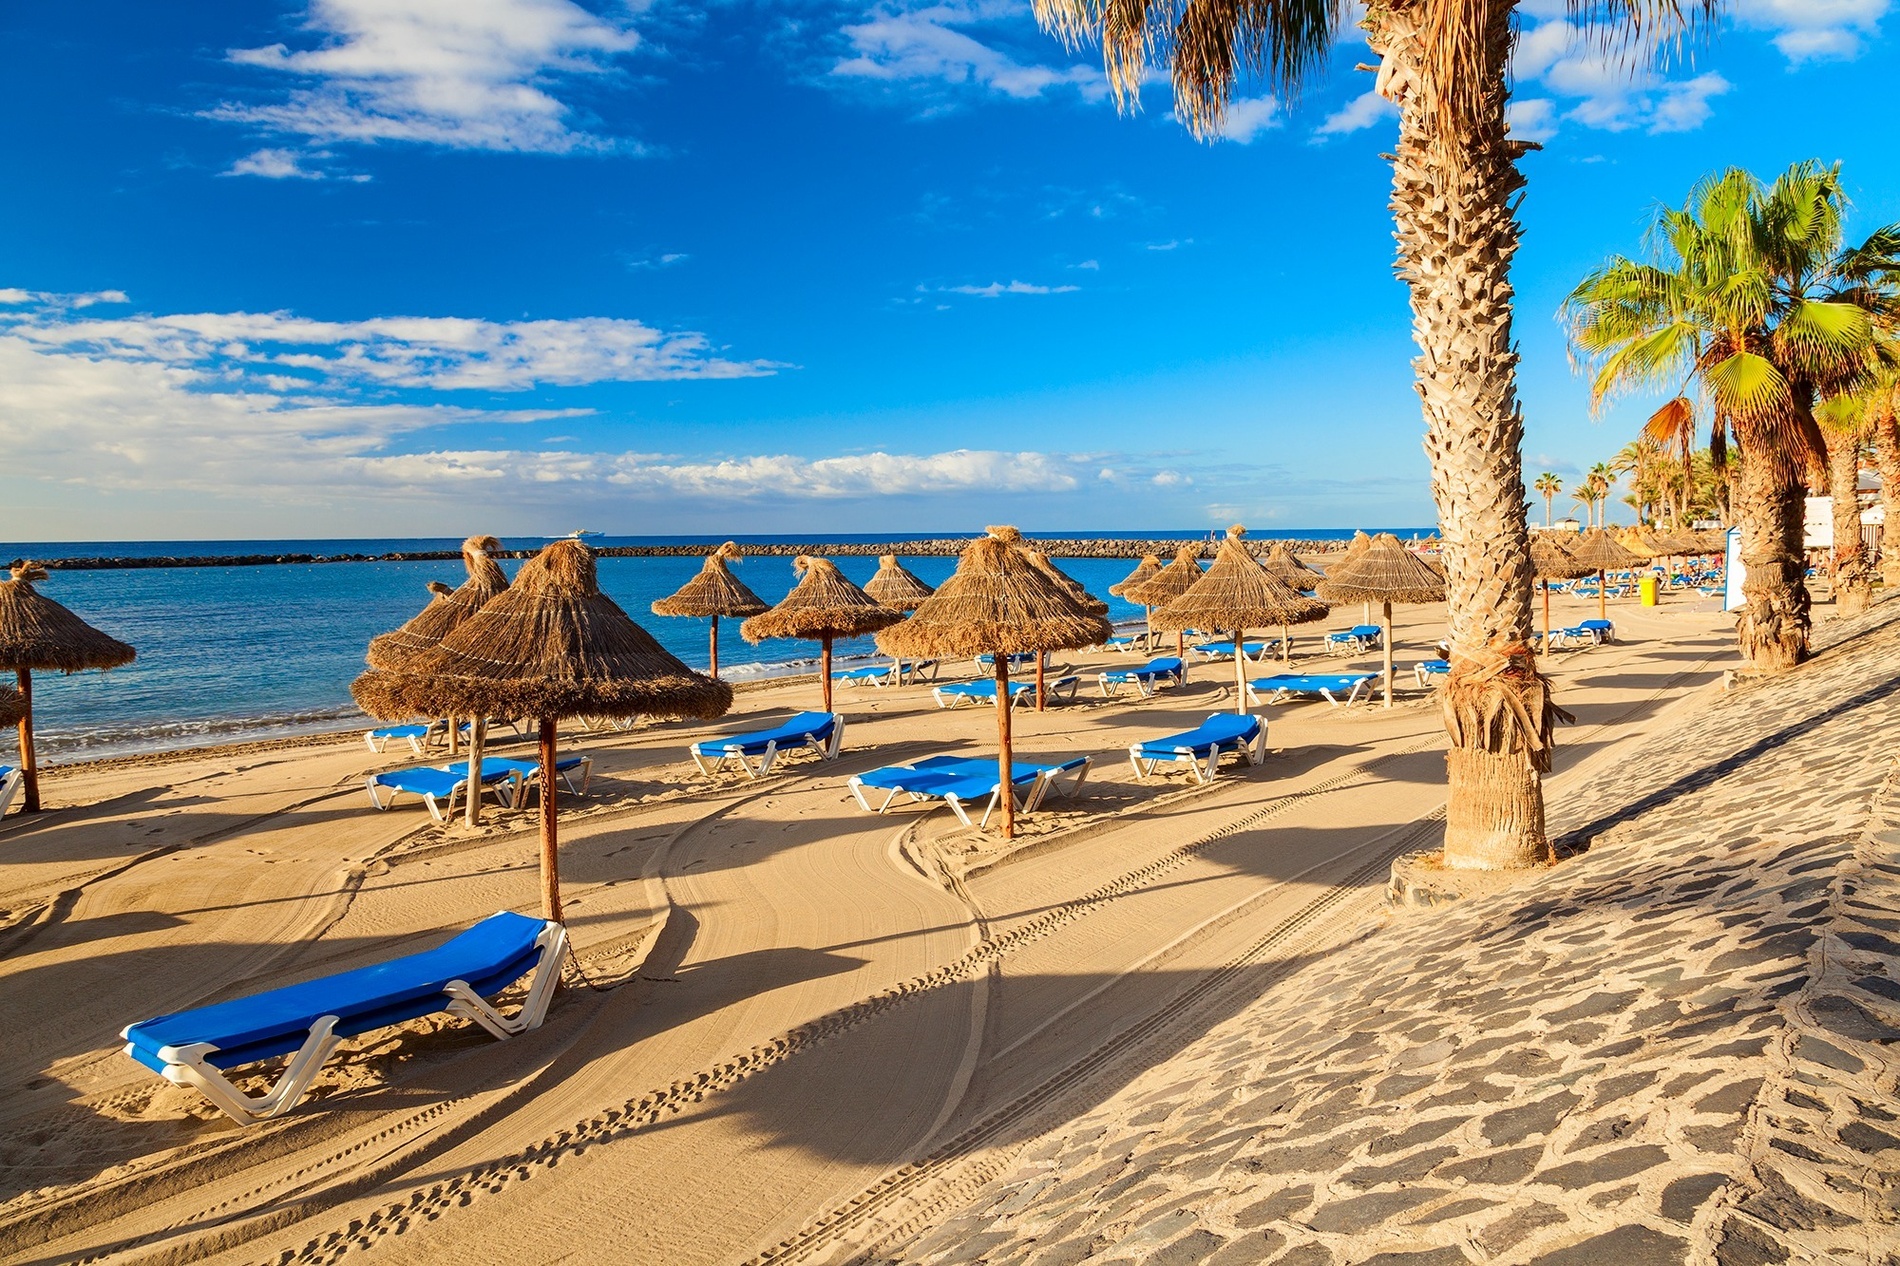 a beach with straw umbrellas and blue chairs